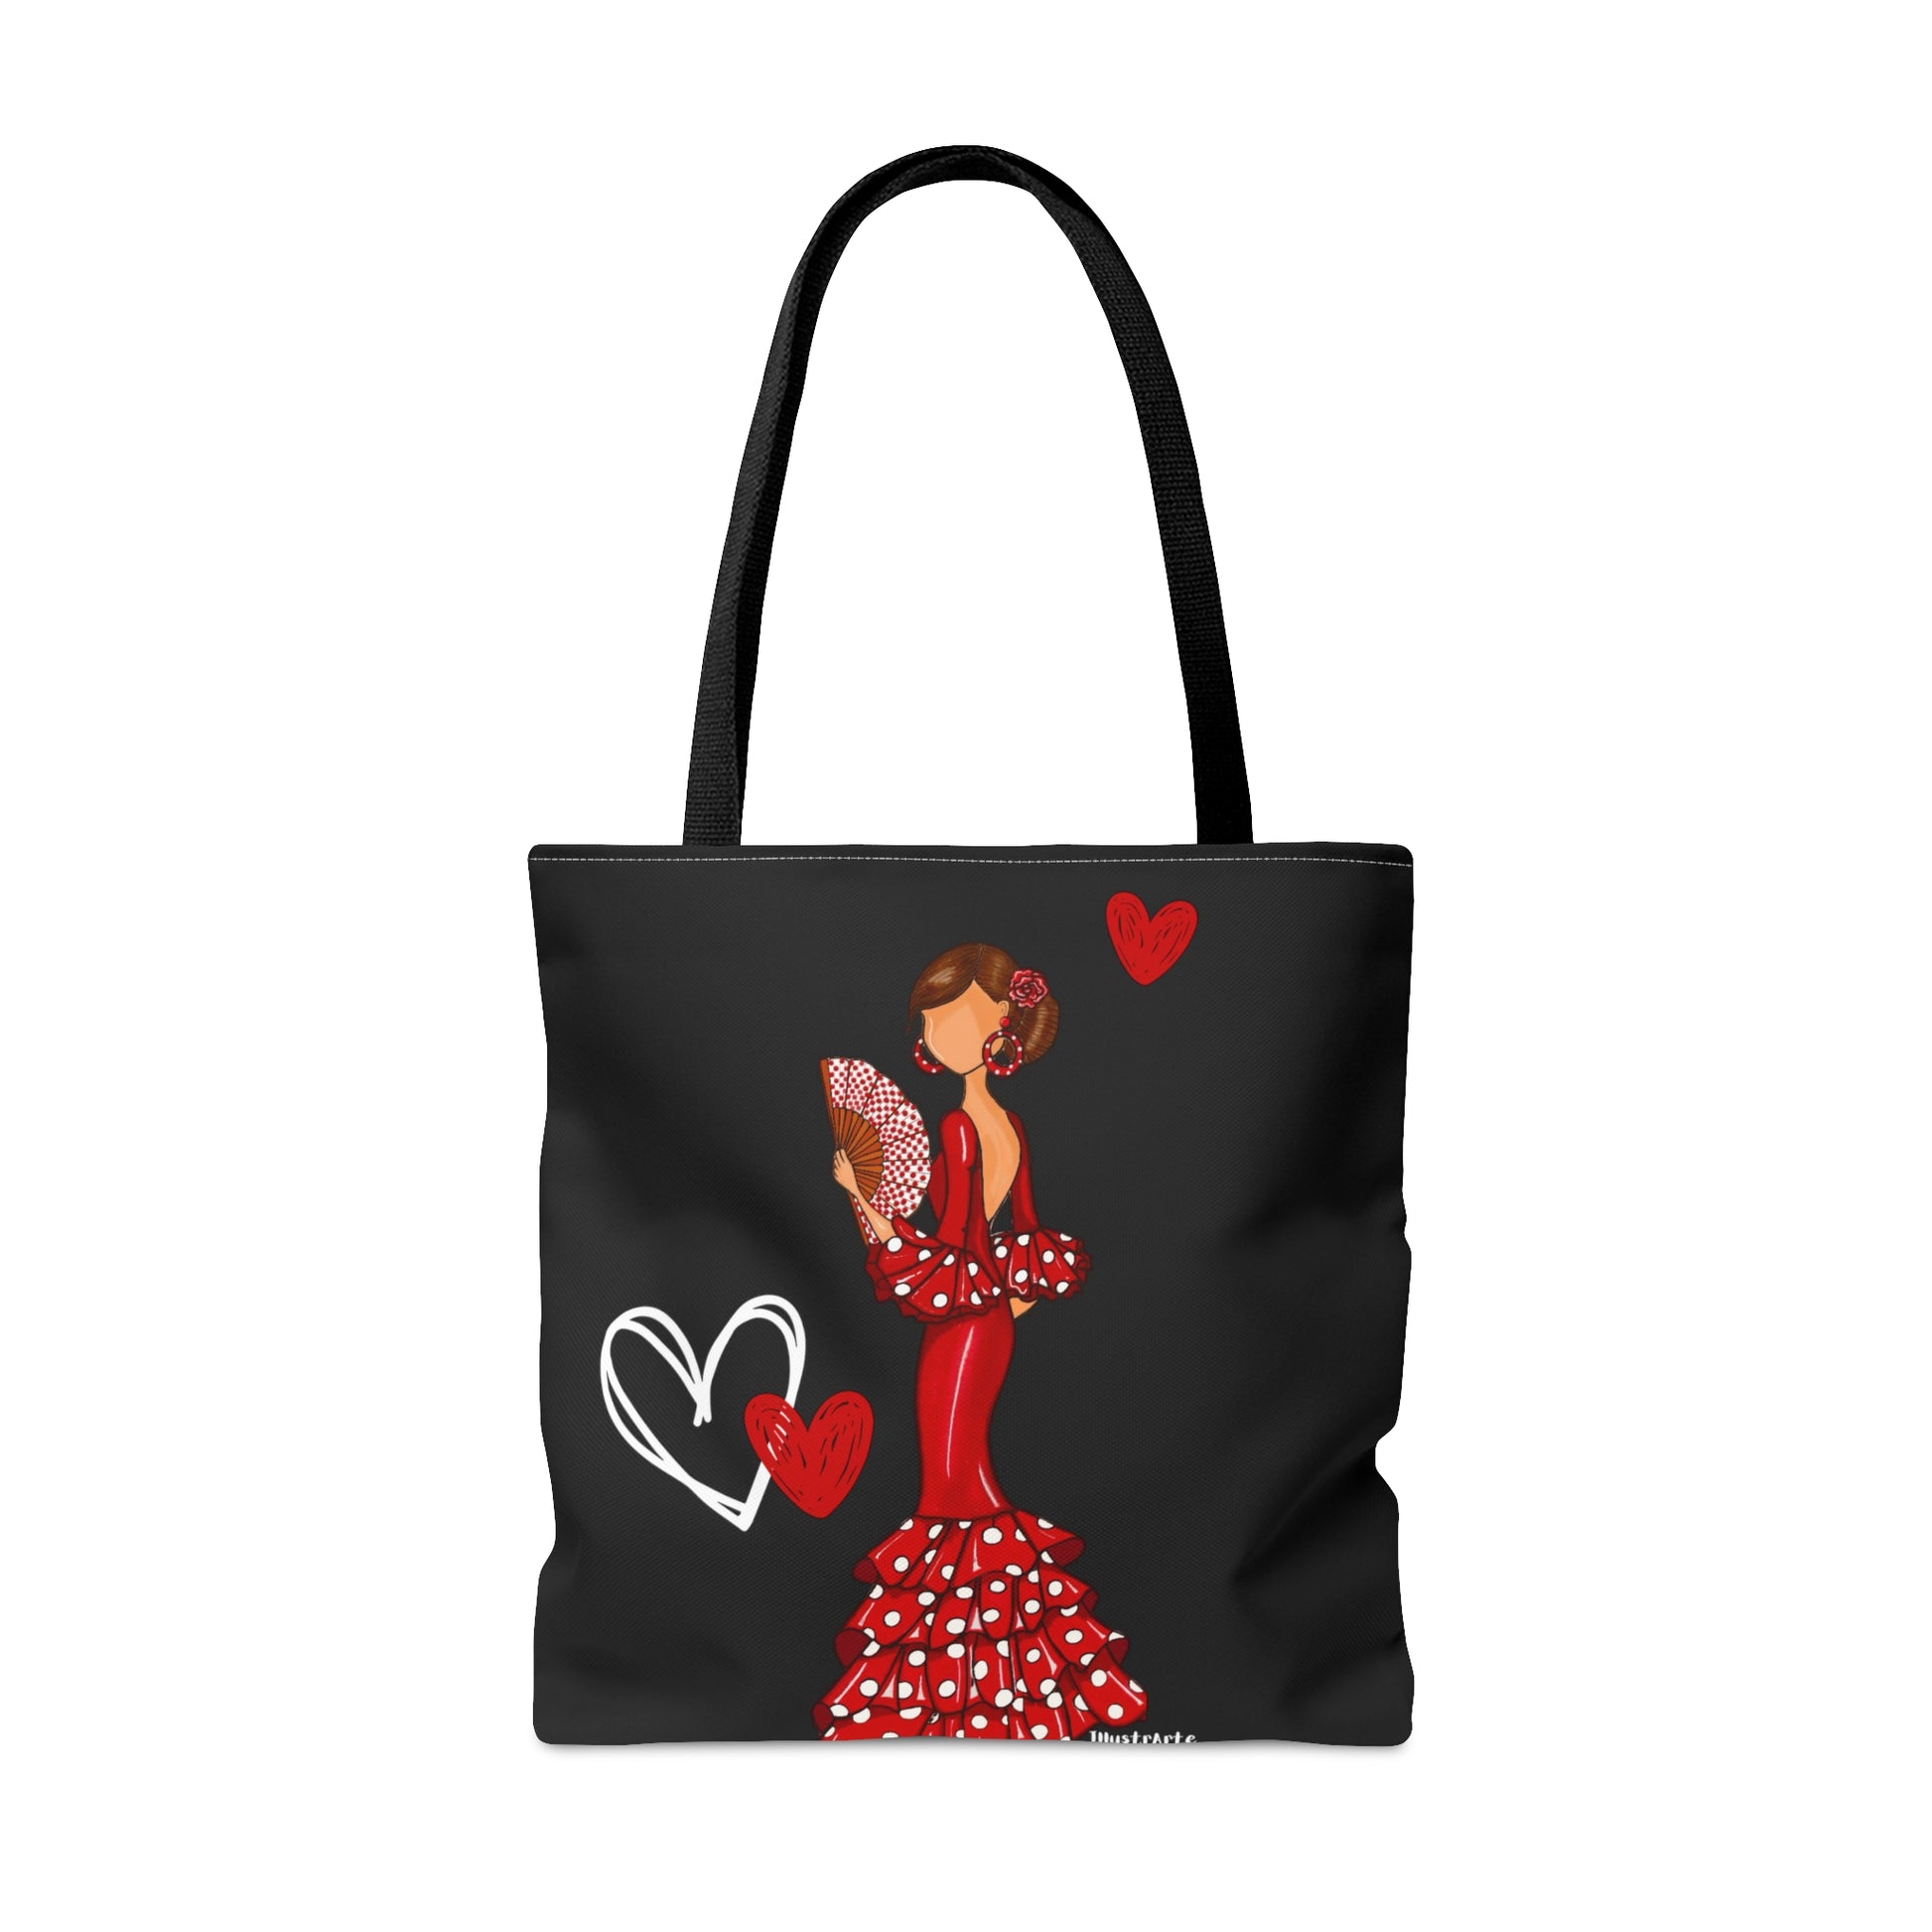 a tote bag with a woman in a red dress holding a fan